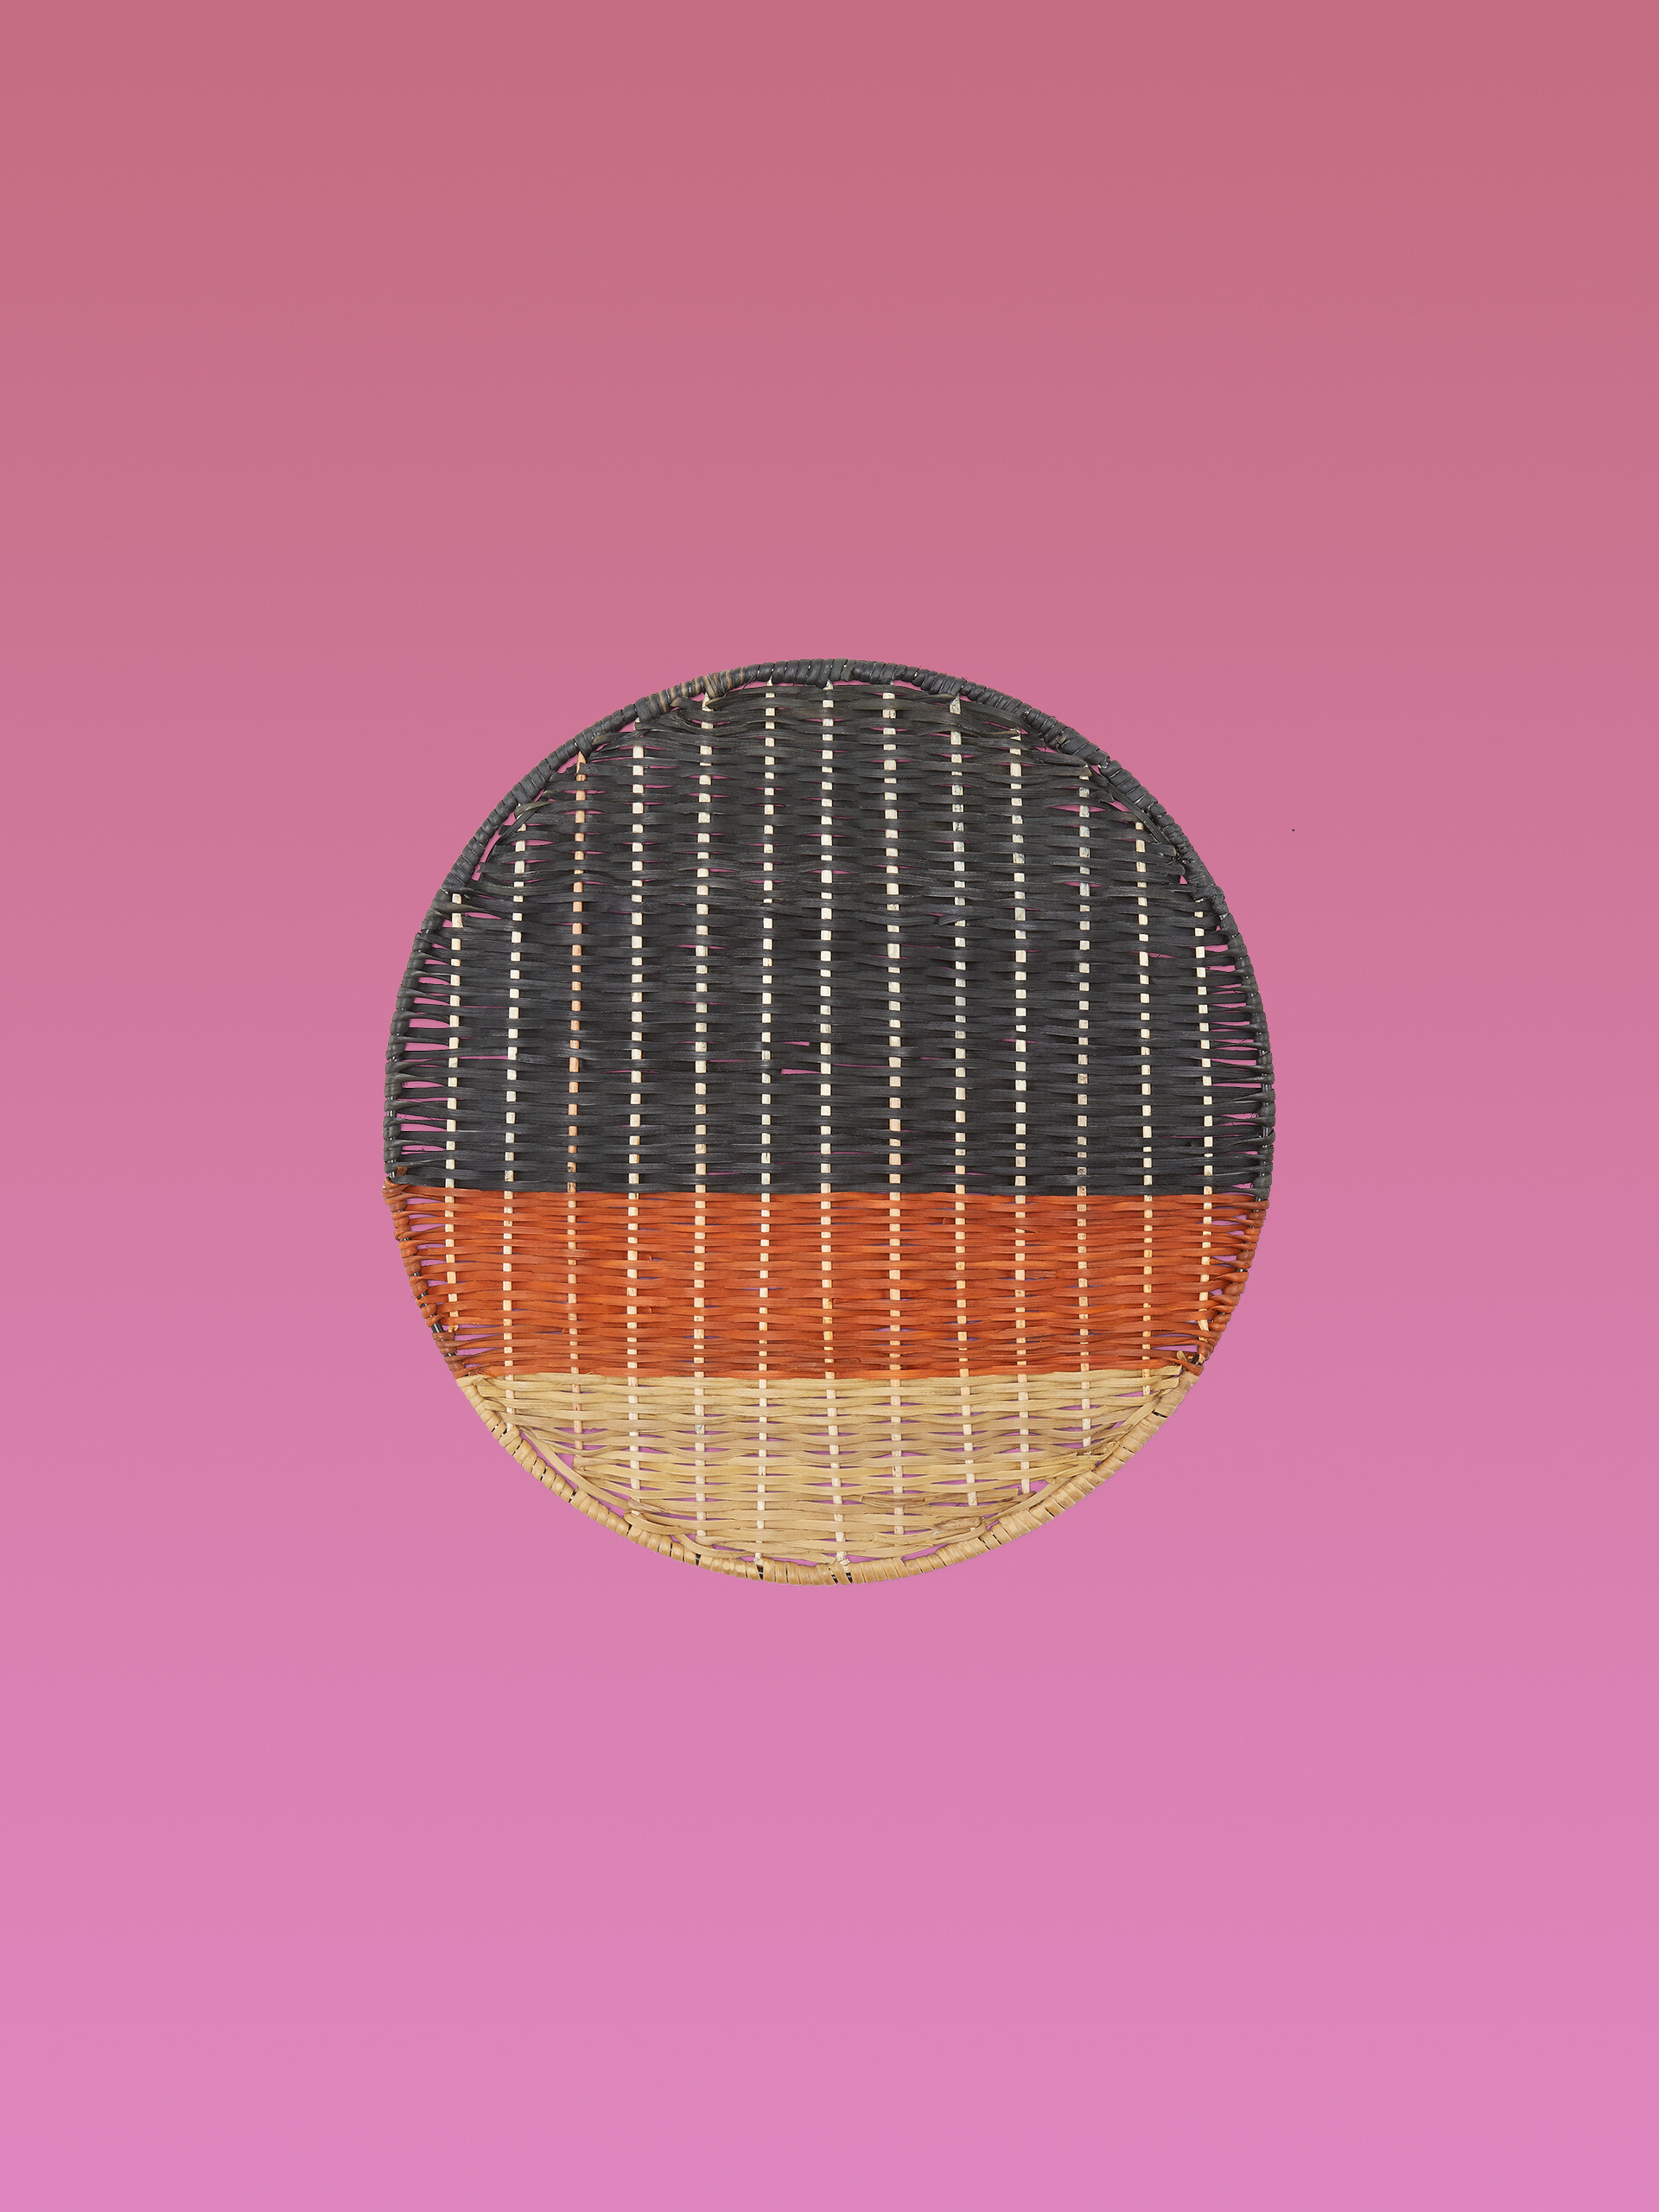 MARNI MARKET round placemat with colour-block motif in iron and beige, burgundy and black wicker - Home Accessories - Image 4